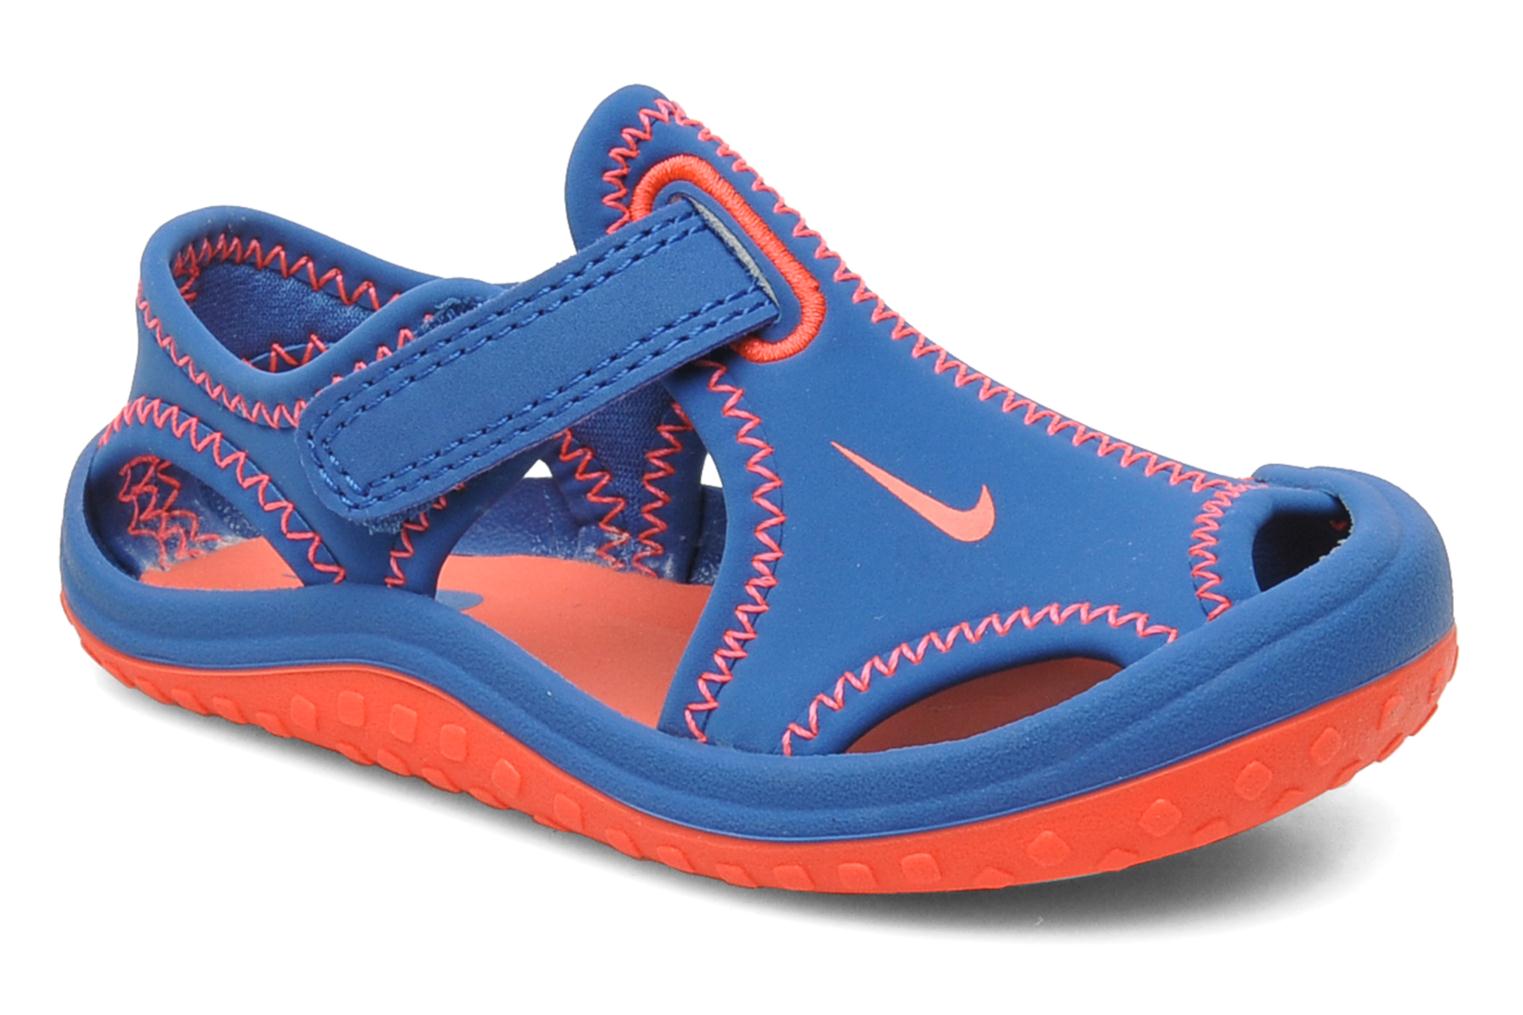 Nike SUNRAY PROTECT (TD) Sport shoes in Blue at Sarenza.co.uk (175381)